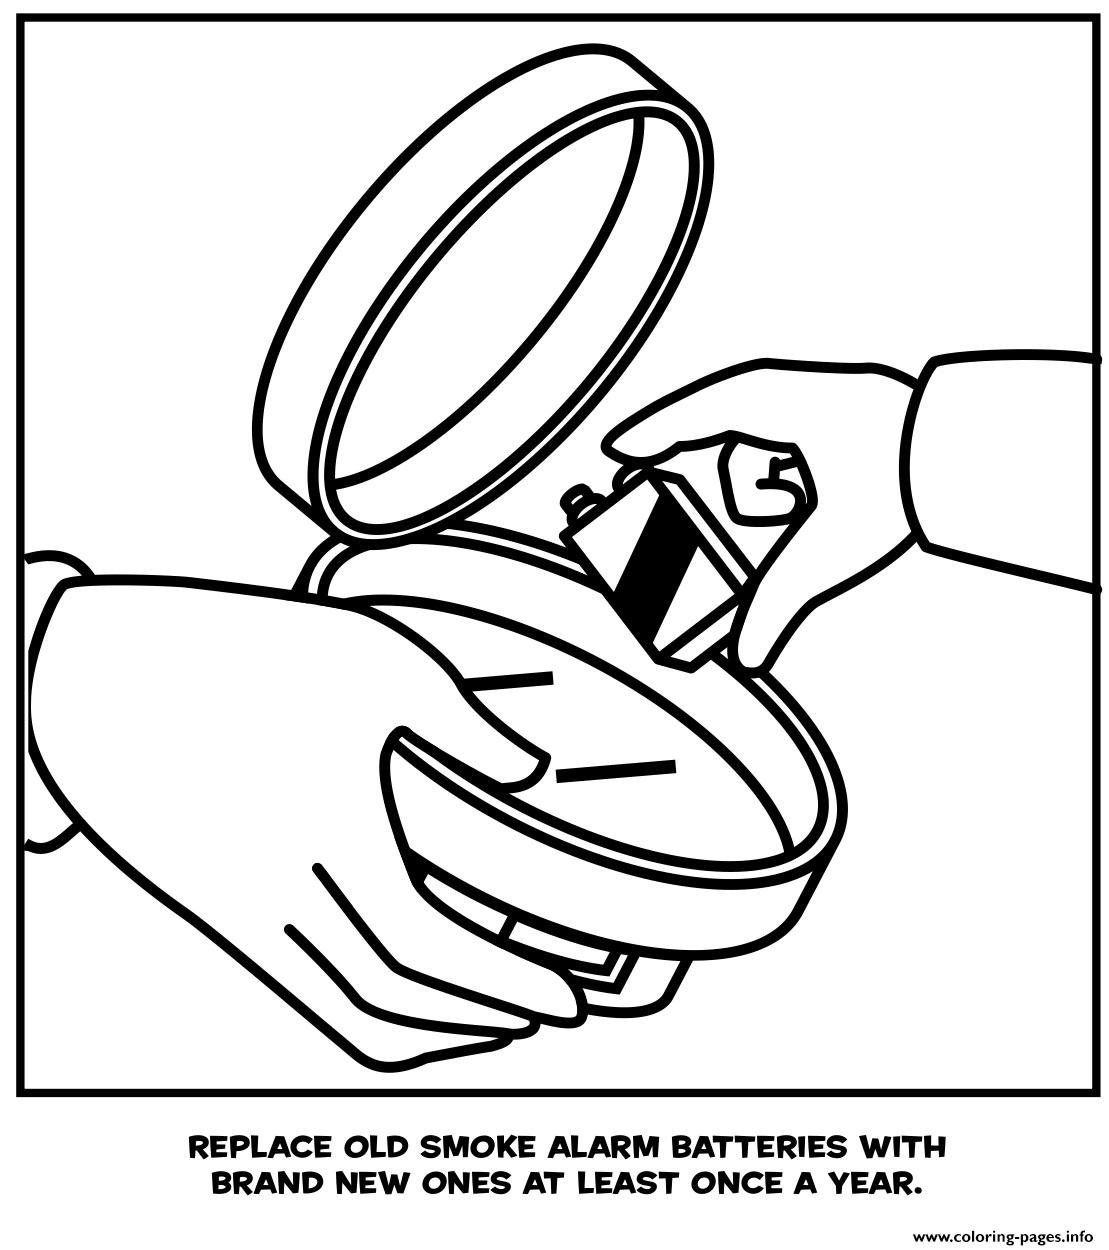 Replace Old Smoke Alarm Batteries With Brand New Ones At Least Once A Year coloring